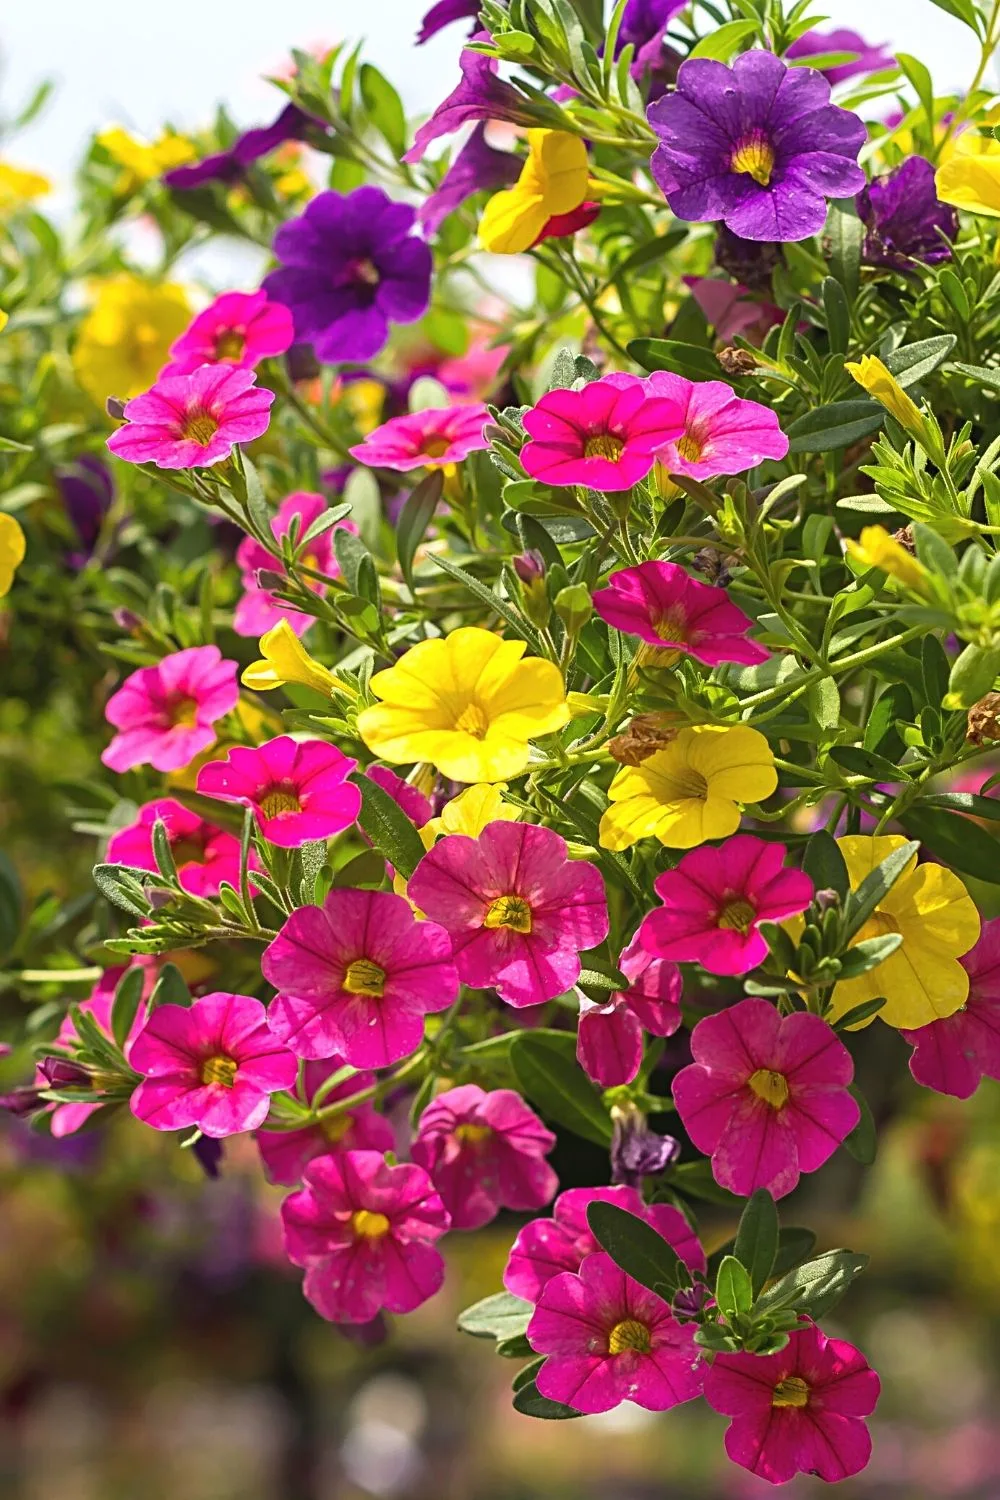 Calibrachoa is another flowering plant that you can grace your west-facing balcony with